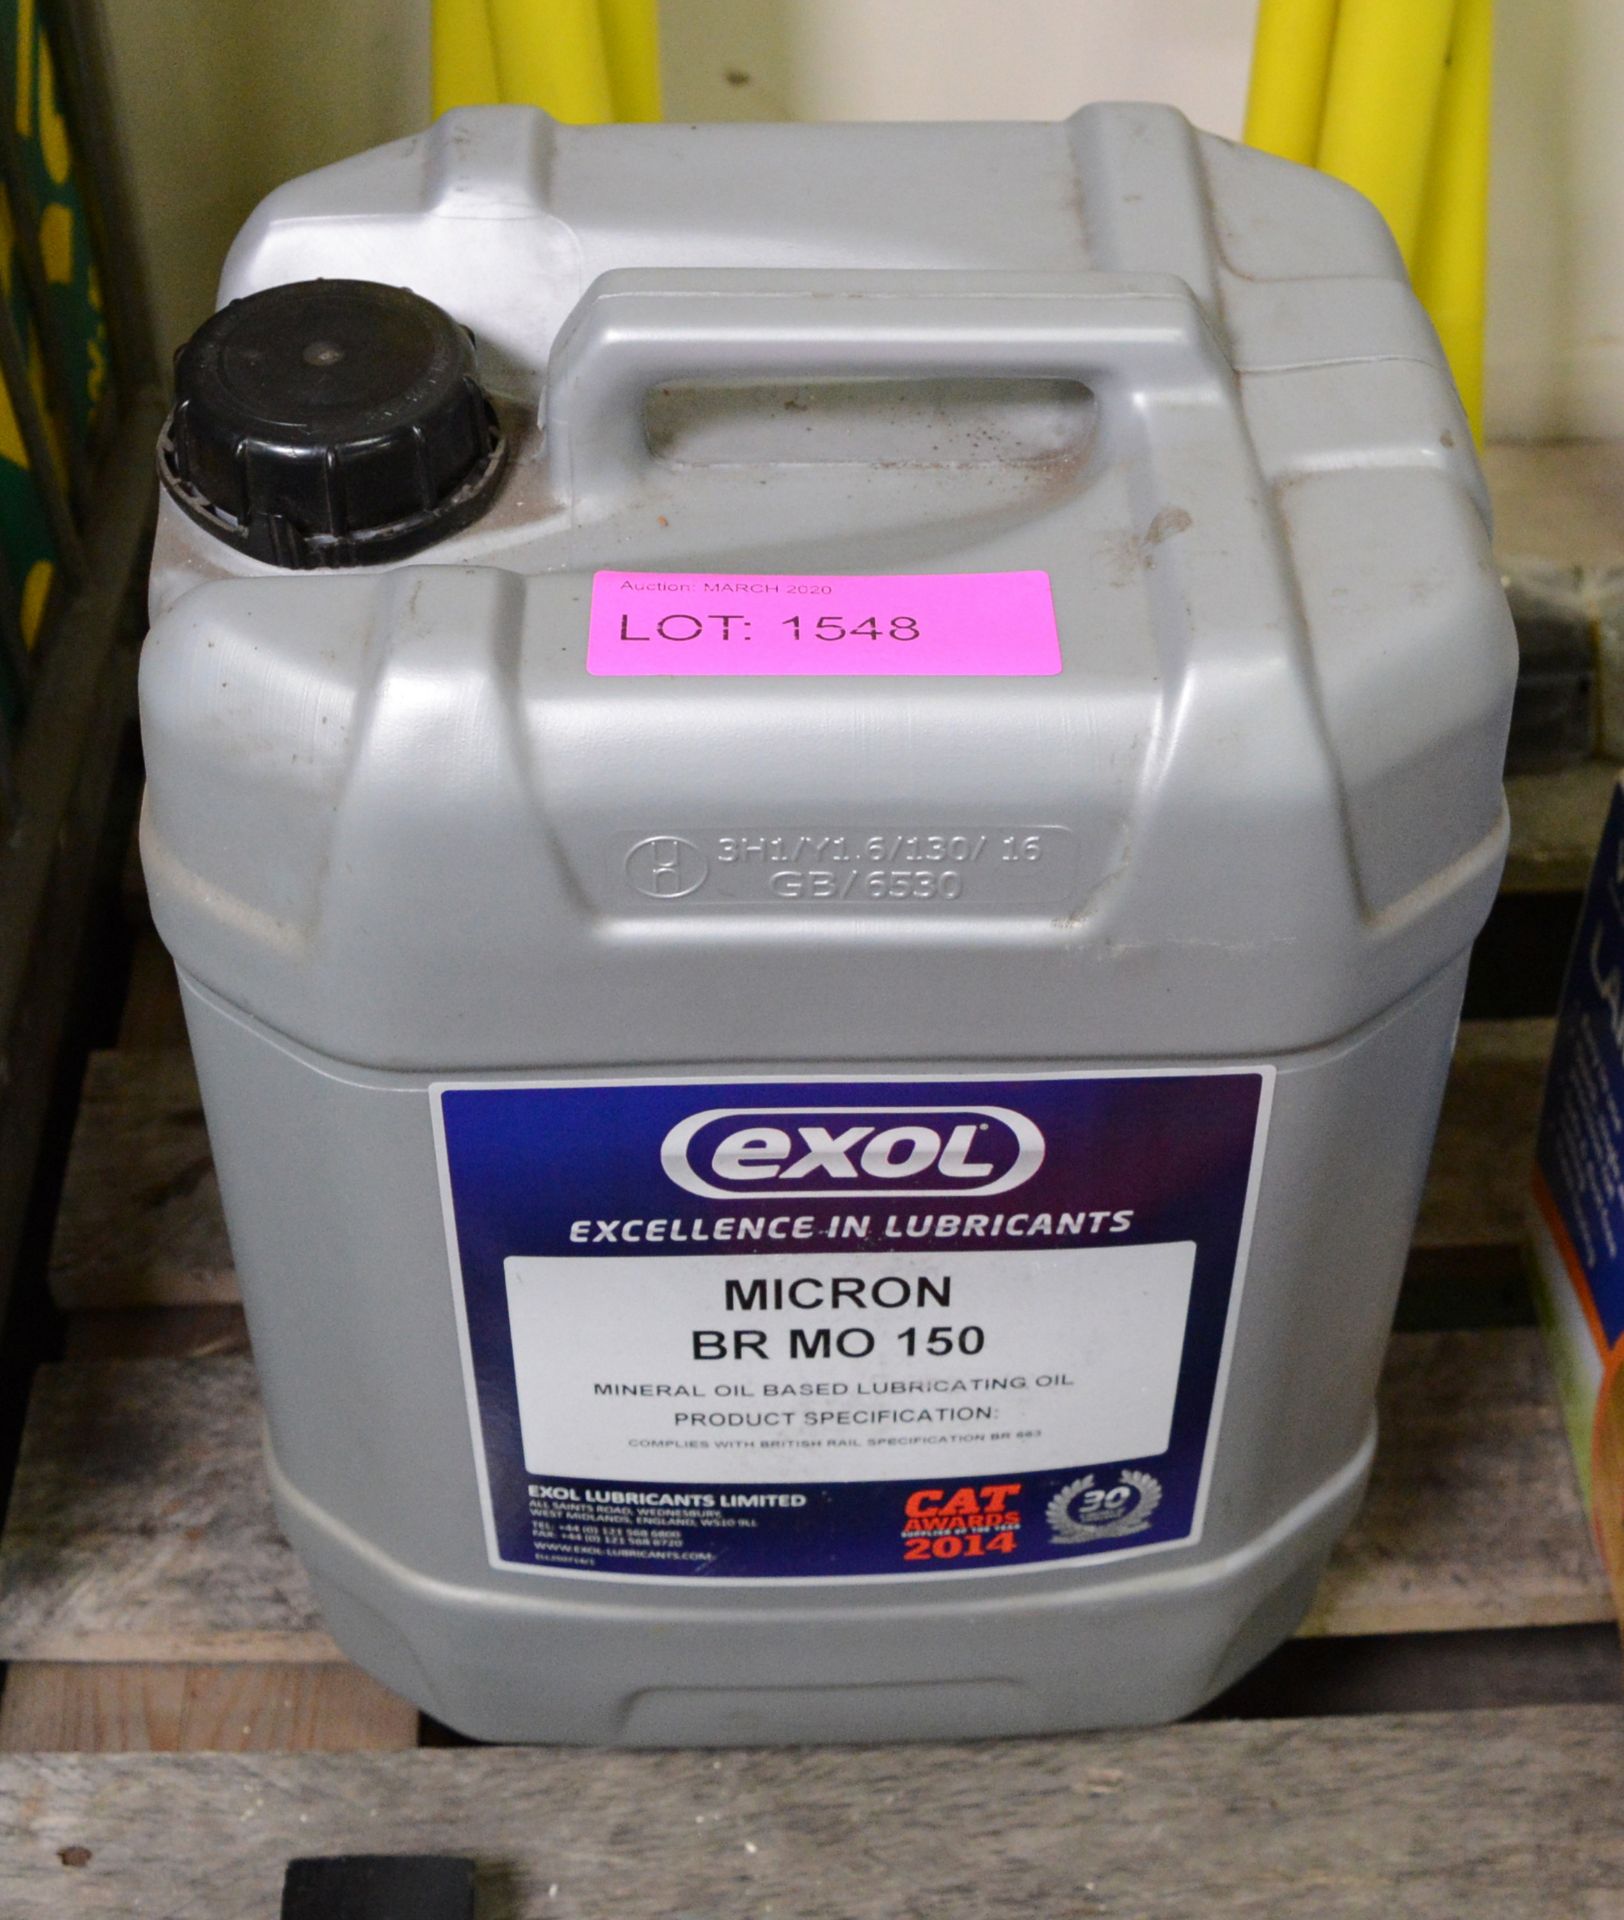 20ltrs Exol Micron BR MO 150 Lubricating Oil - COLLECTION ONLY.